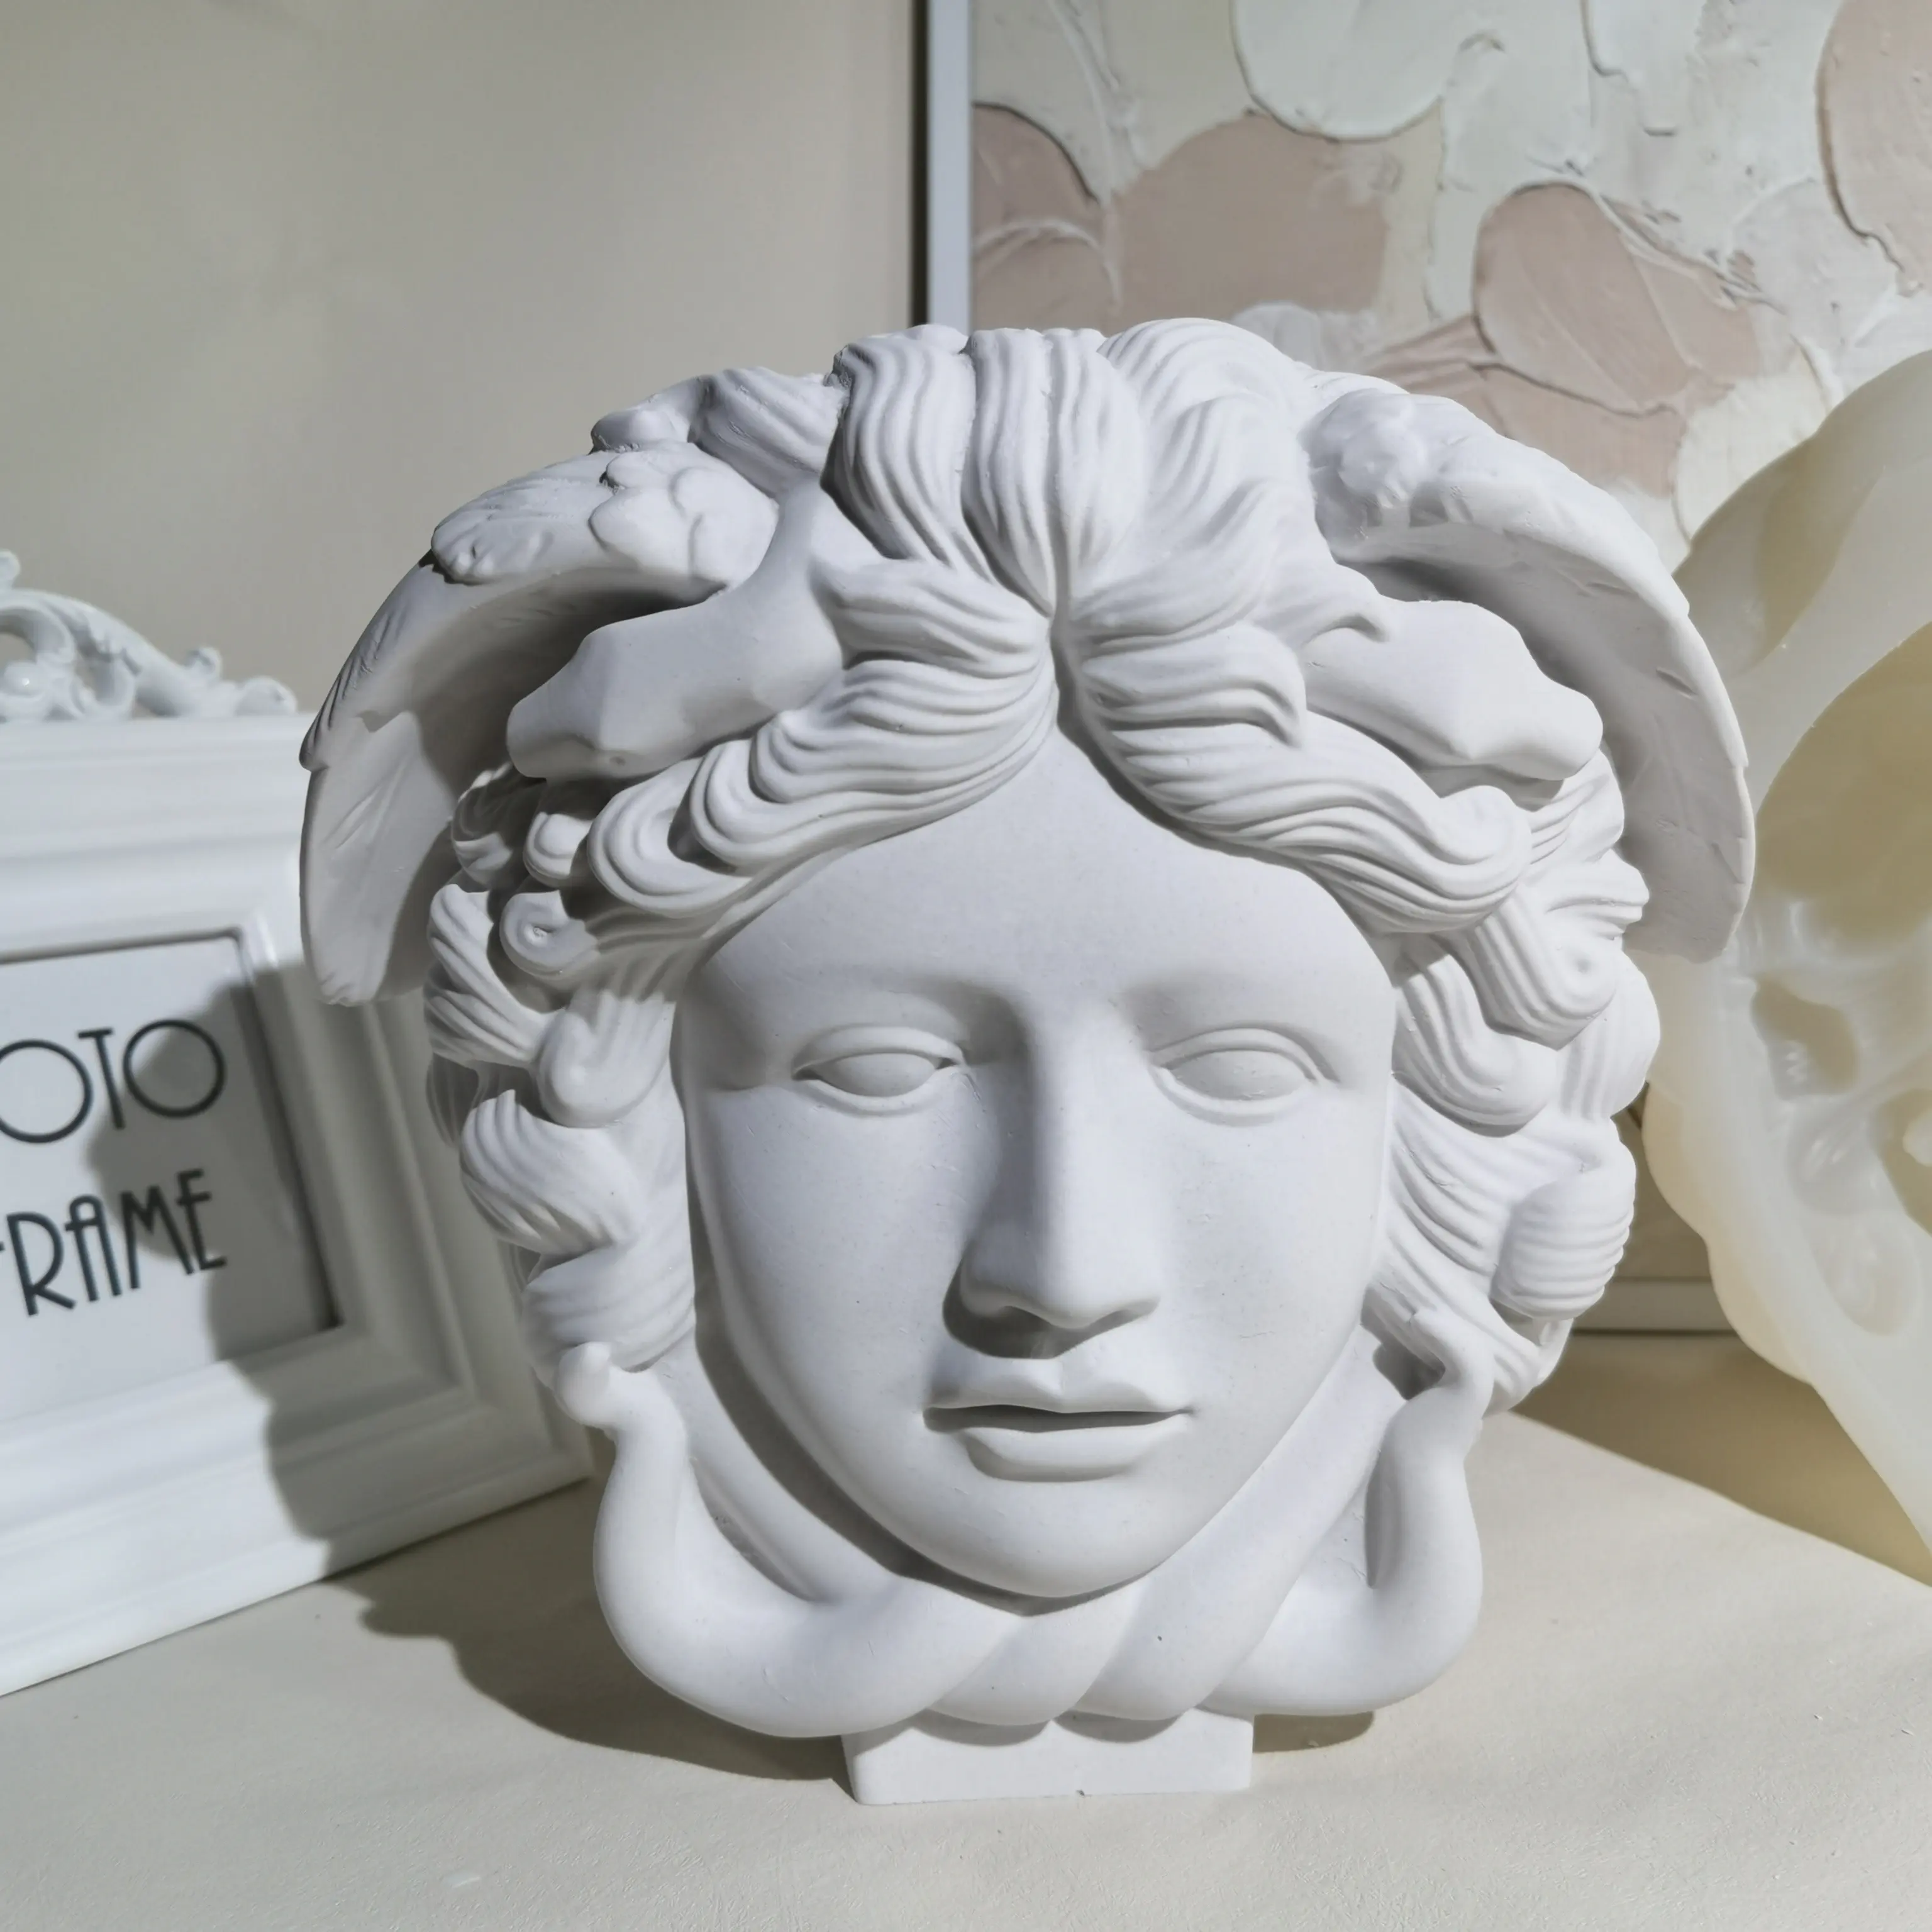 D-8151 Large Medusa Diy 3D Silicone Candle Mold Face Snake Hair Mythical Characters Sculpture Statue Gypsum Home Decor Wax Mould